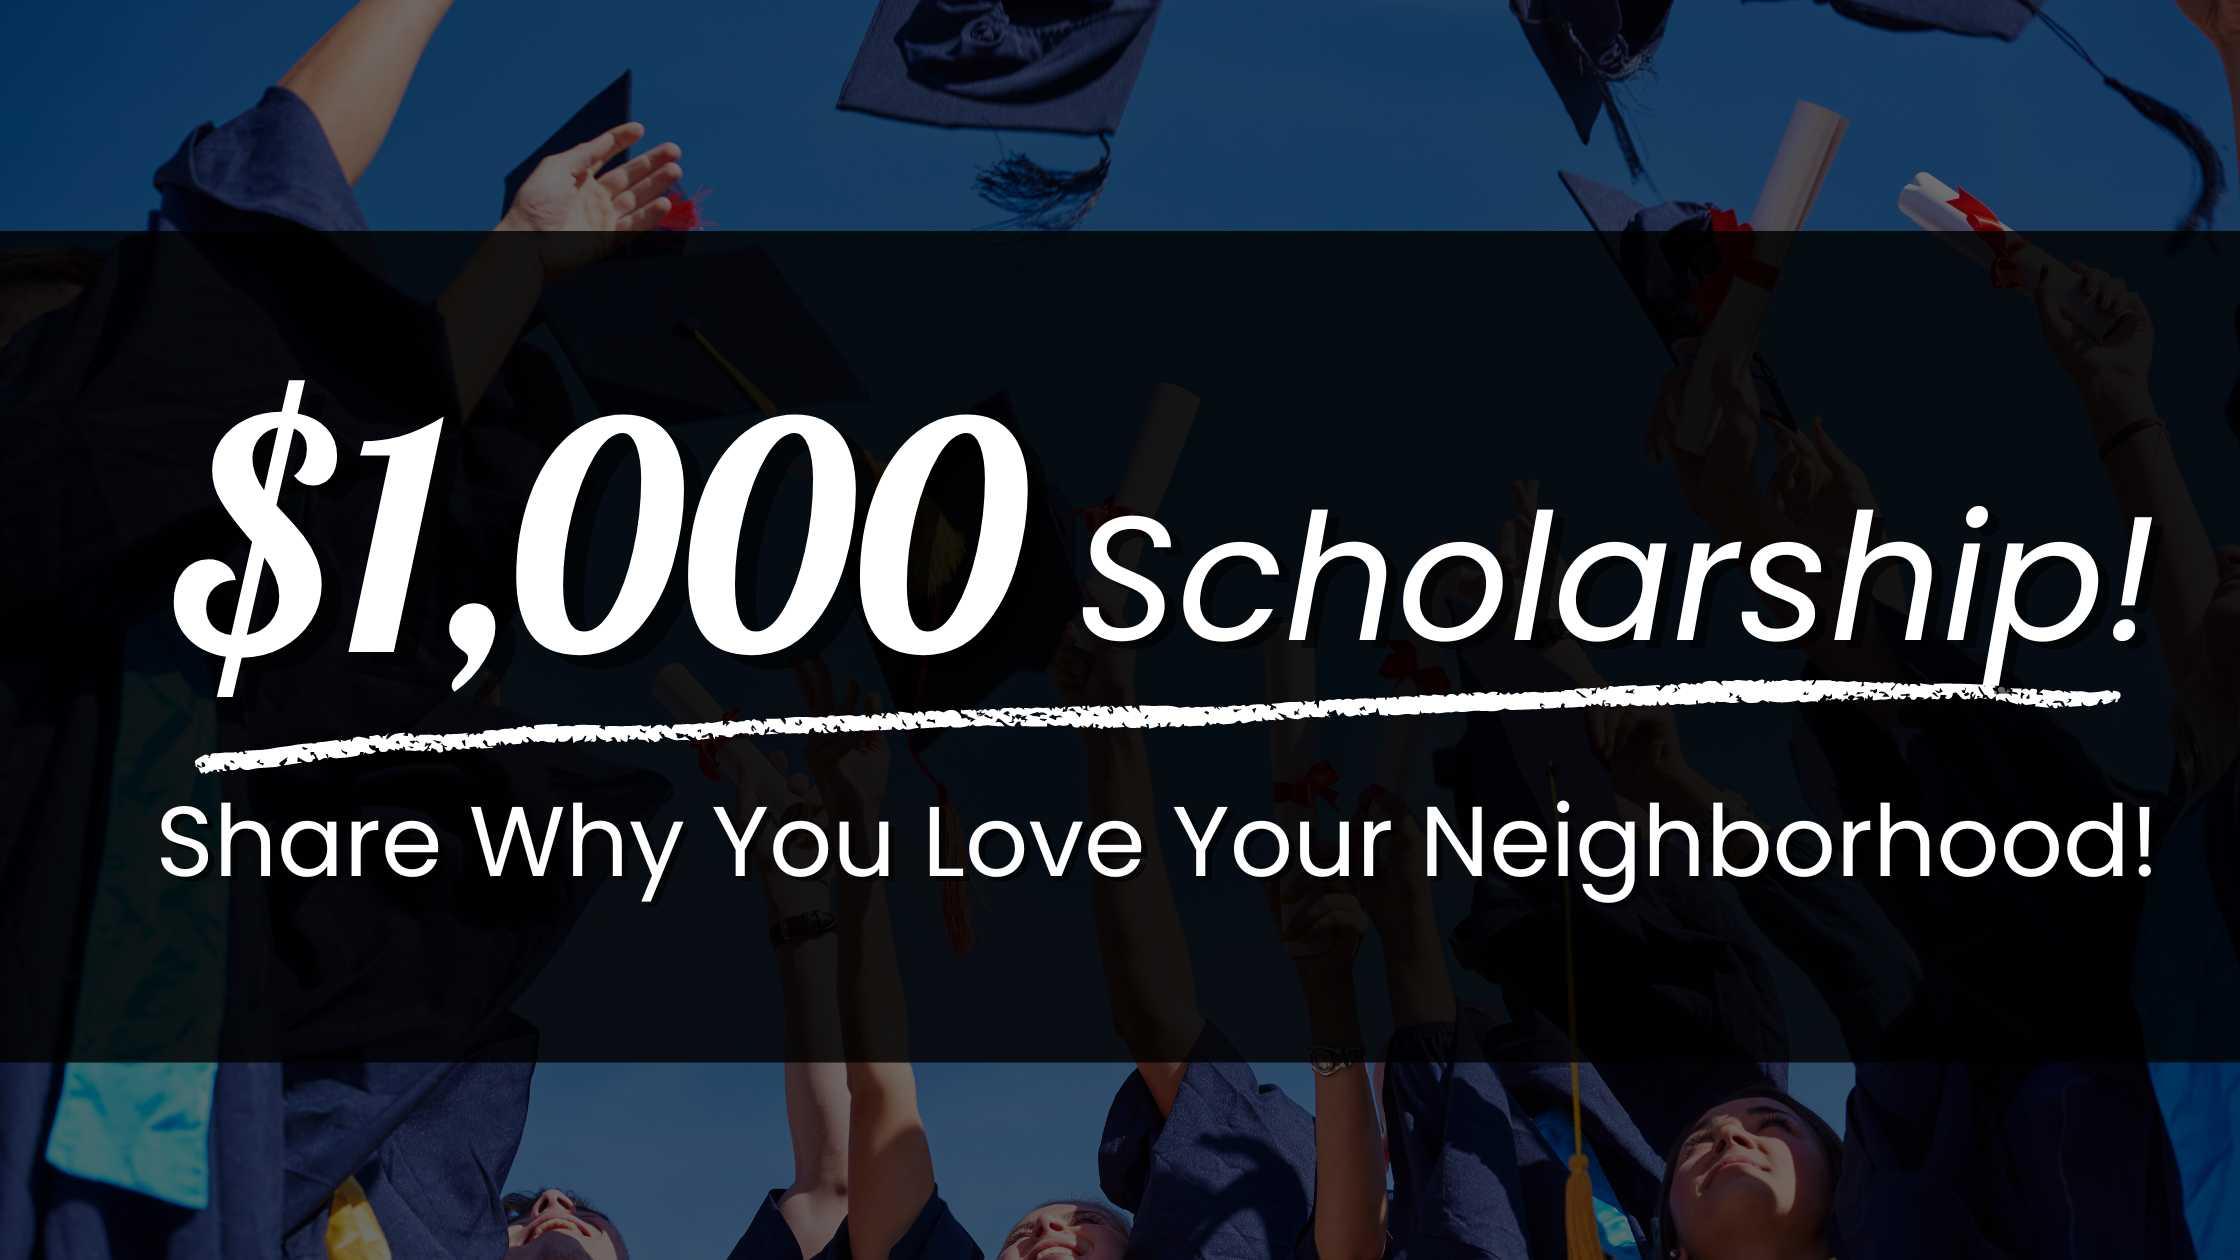 Win $1,000 Scholarship: Share Why You Love Living in Your Neighborhood!